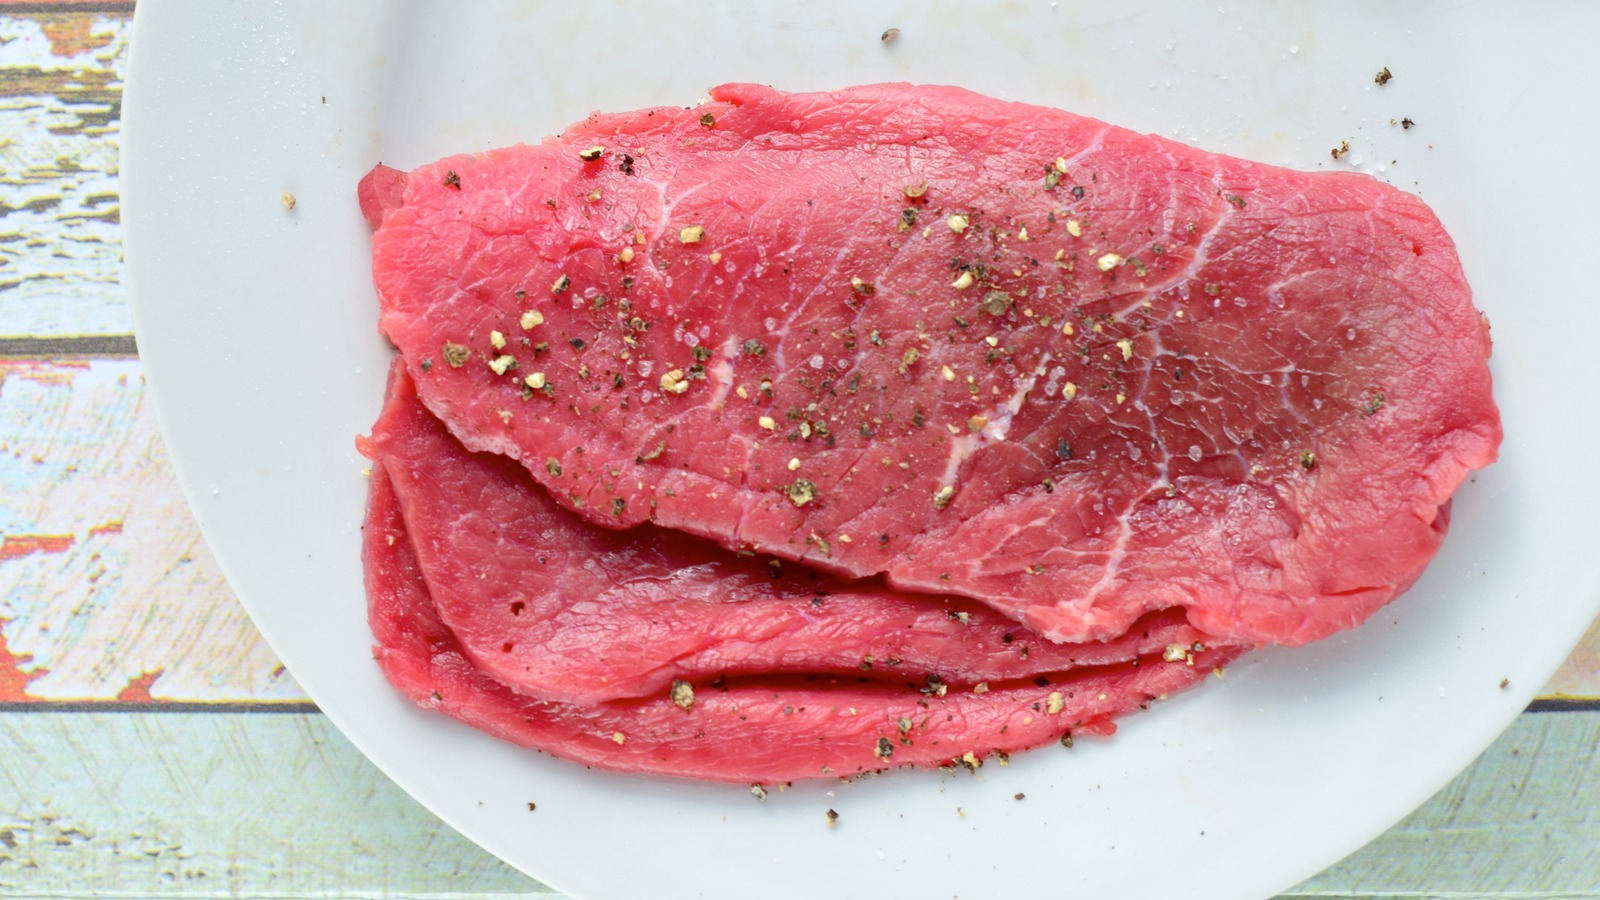 Minute steak is an instant steak with a misleading name